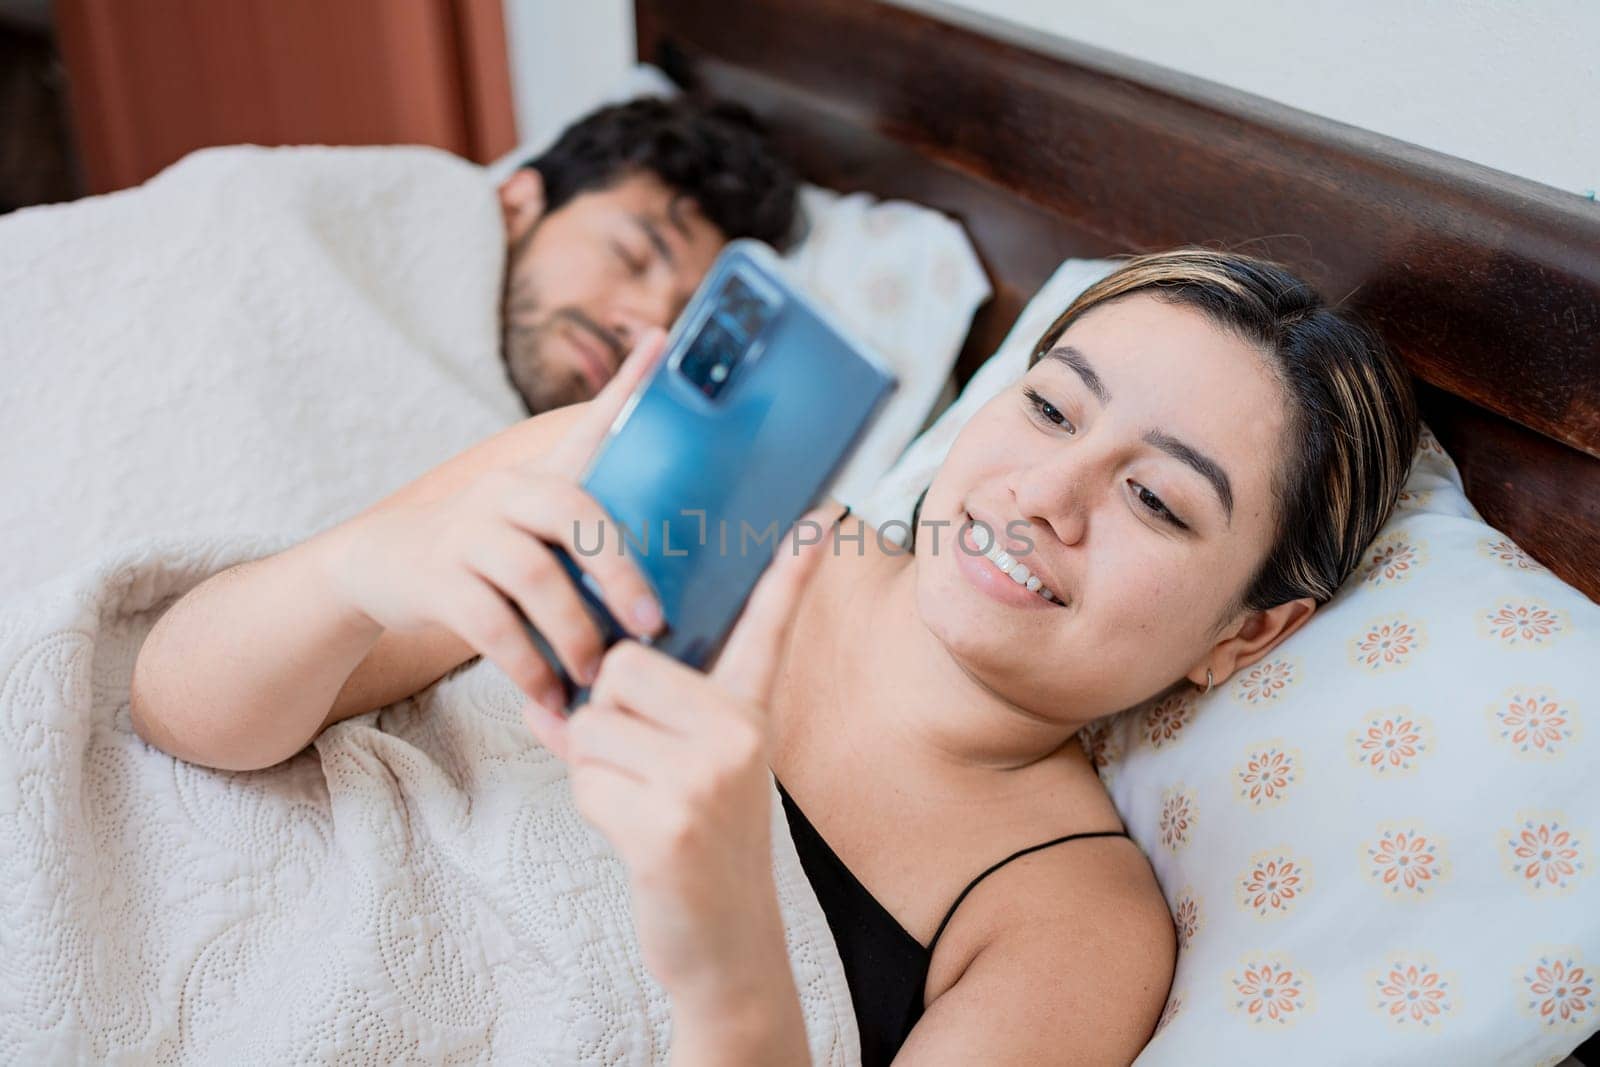 Unfaithful wife with phone while her husband sleeps. Unfaithful woman with phone while the man sleeps. Unfaithful girlfriend with phone while boyfriend sleeps by isaiphoto